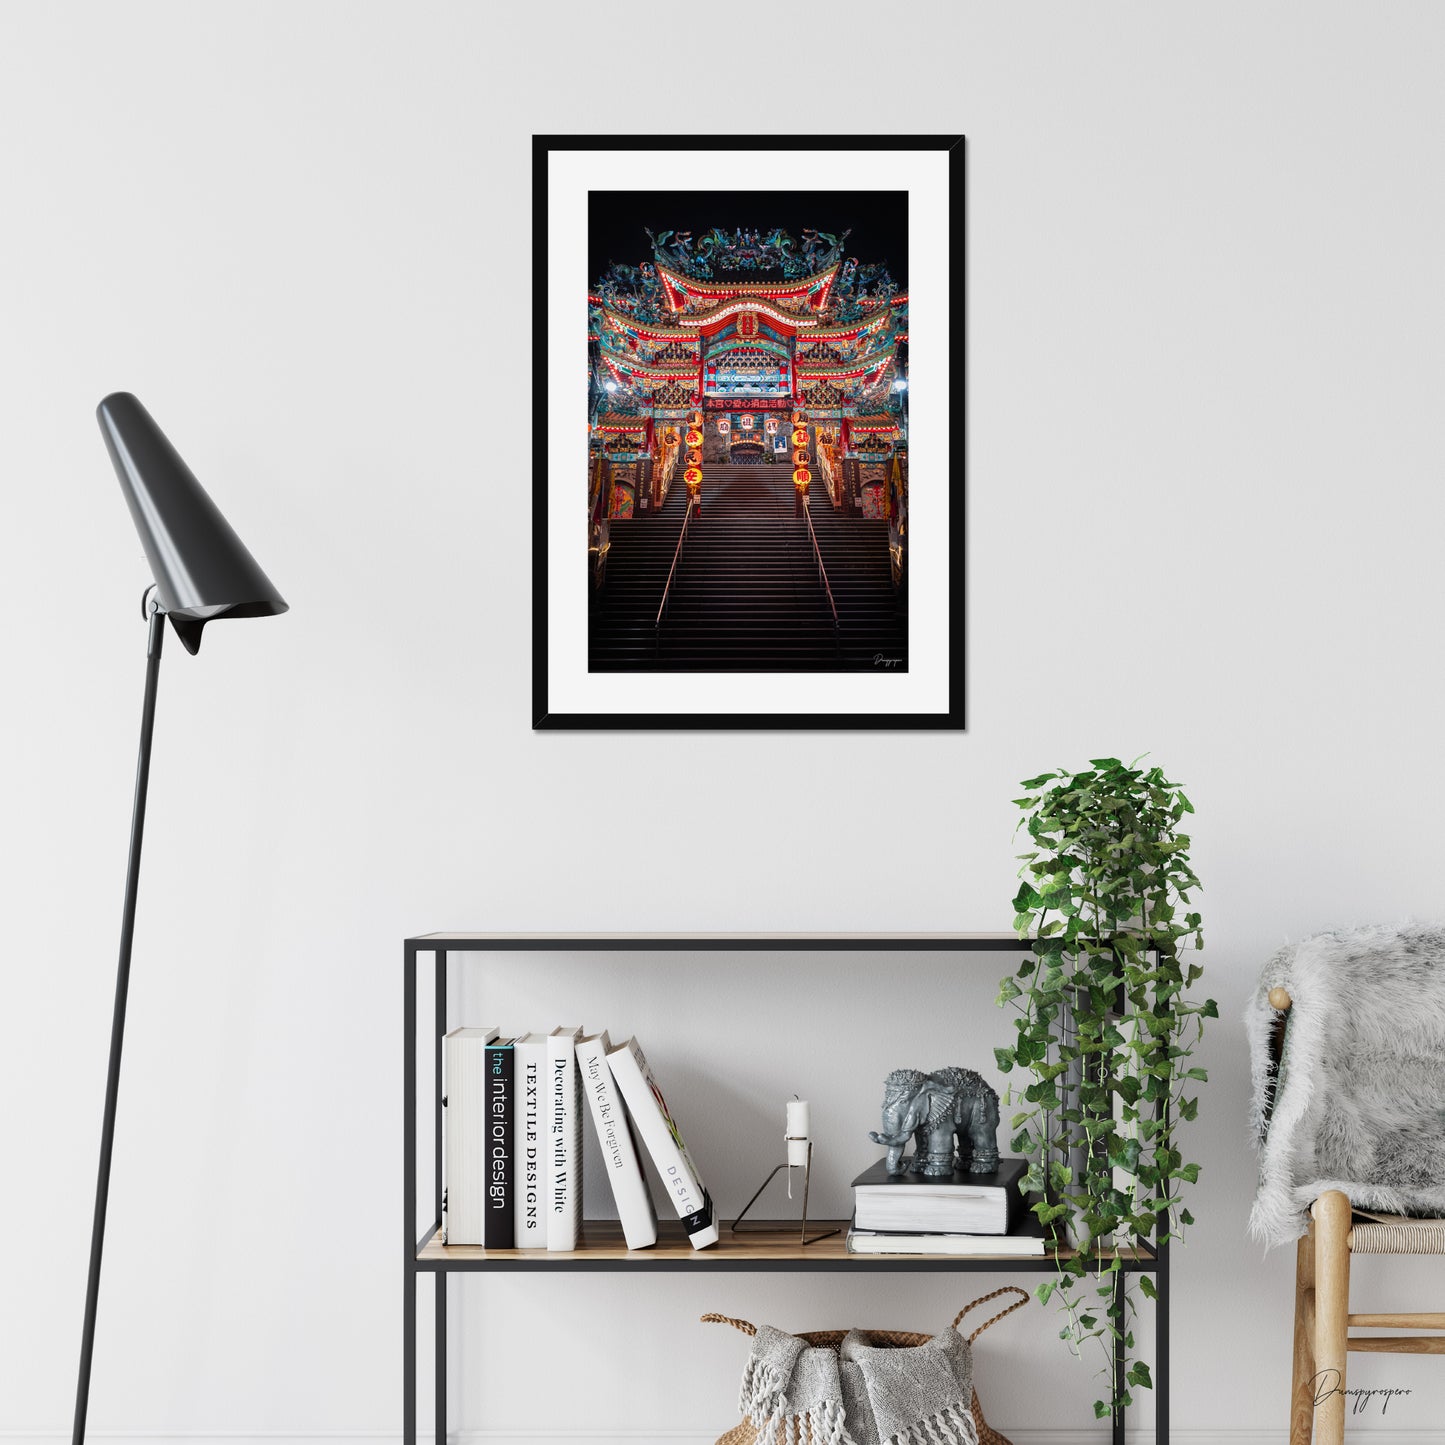 Mockup of wall art showing a big black wooden frame that is hanging on the wall of a living room and contains a photo of a very impressive Taoist temple during the night in Taipei Taiwan